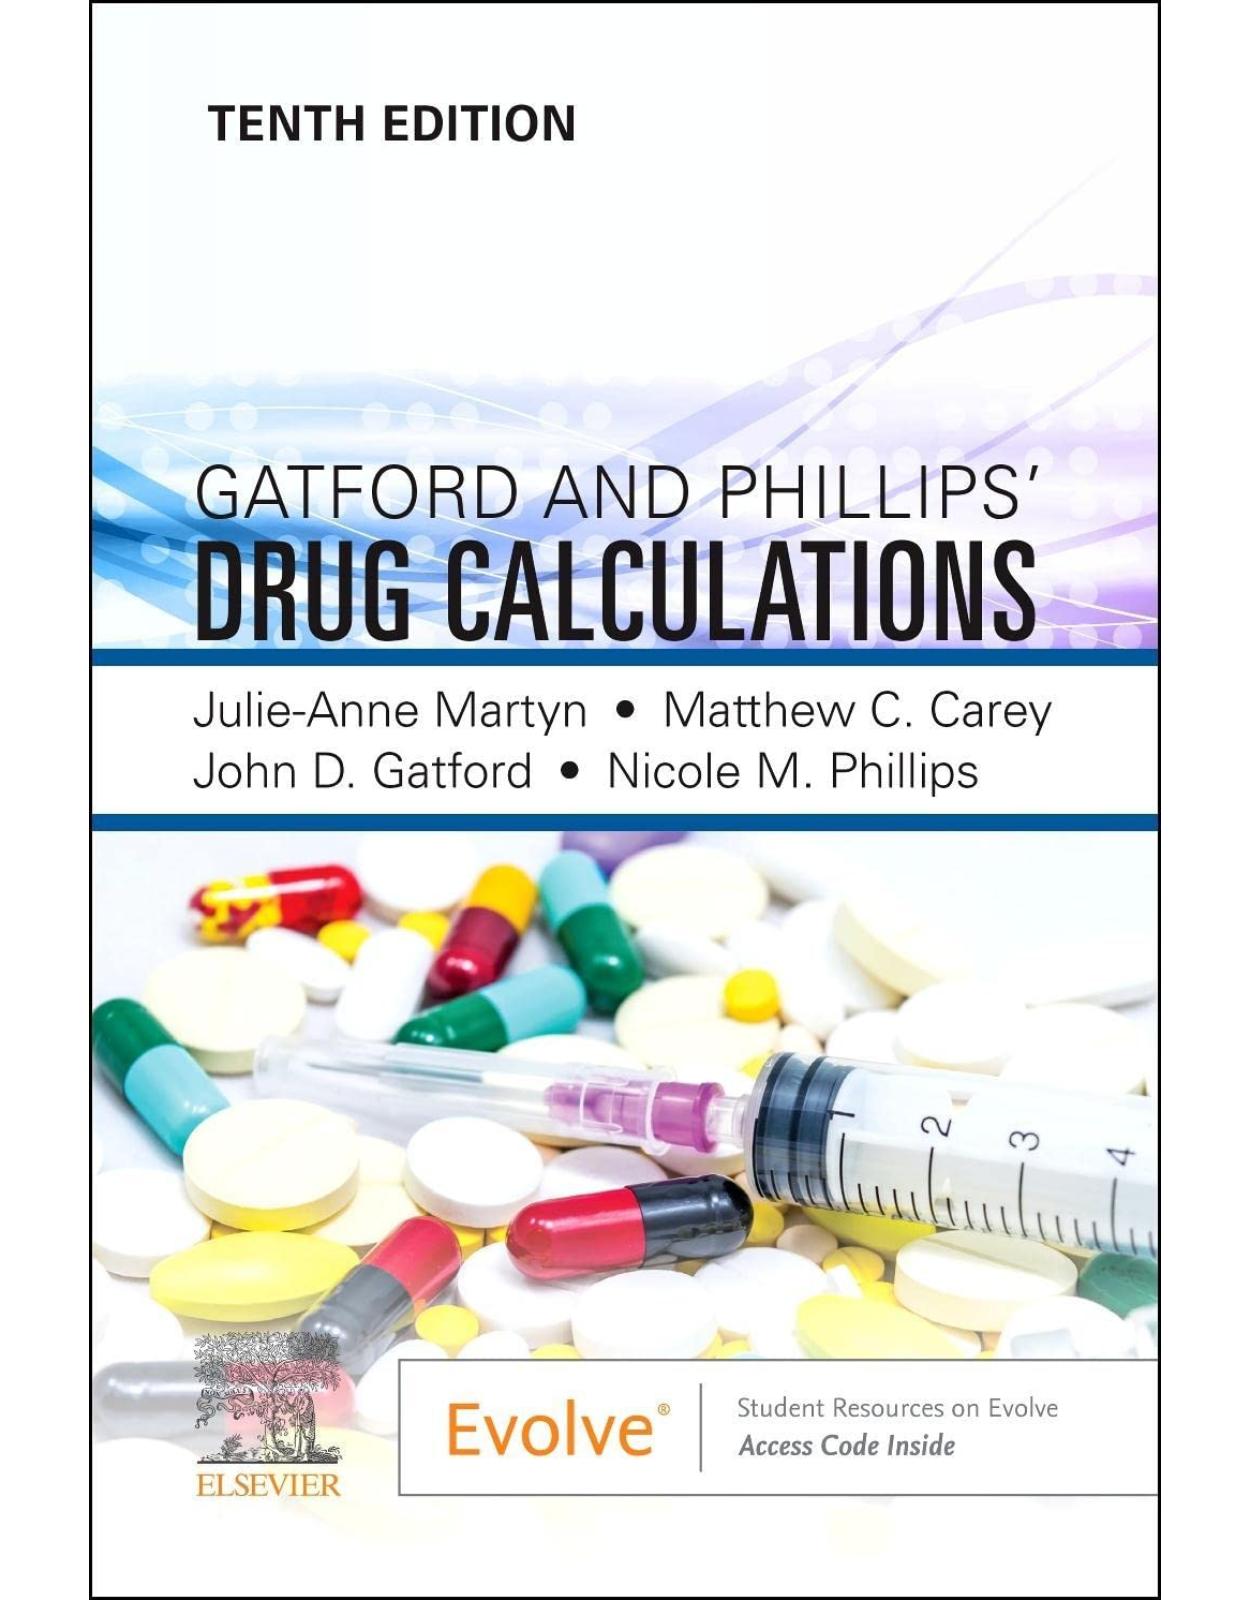 Gatford and Phillips' Drug Calculations